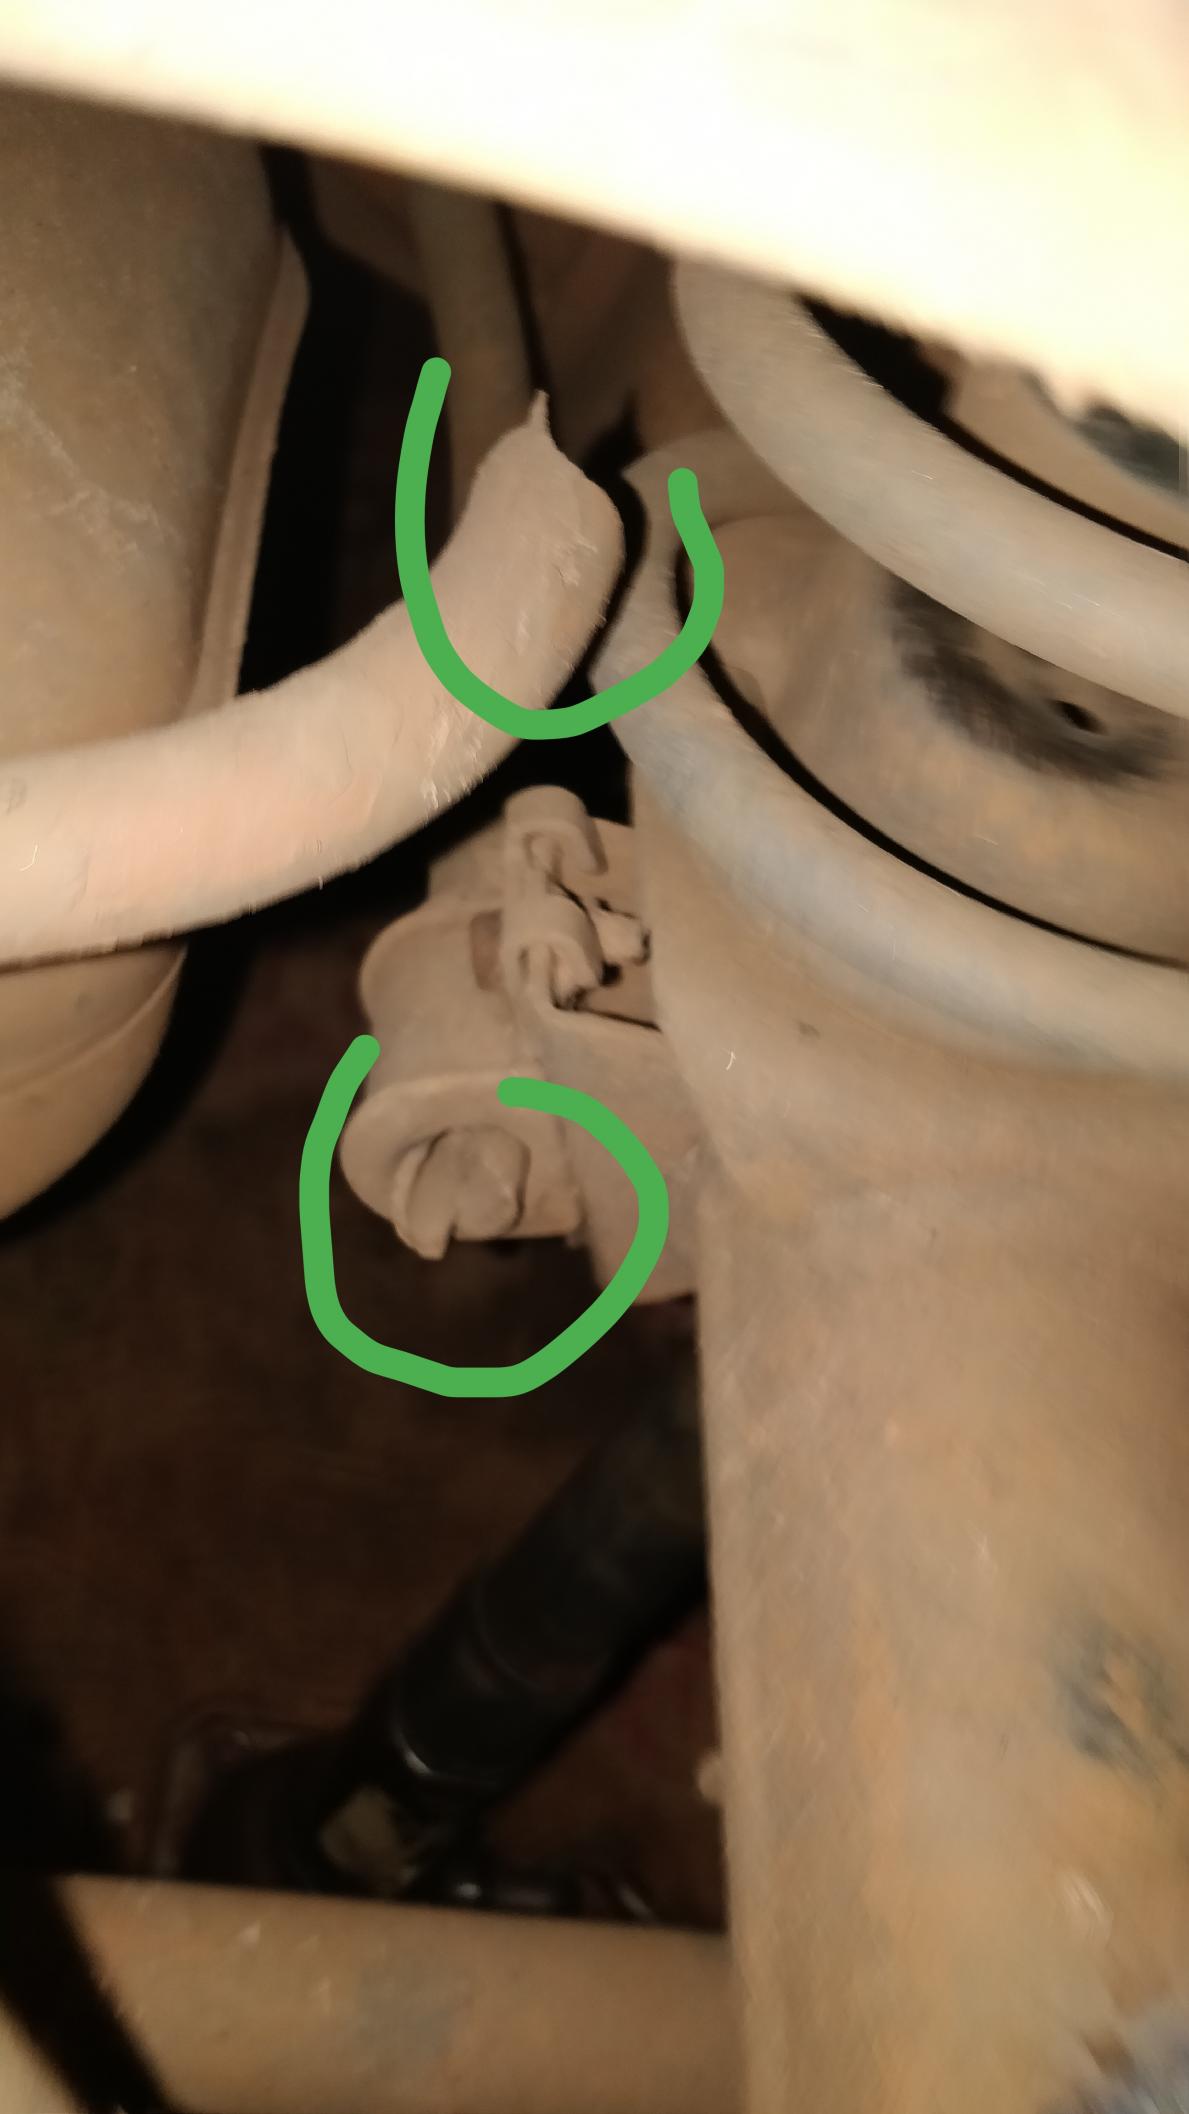 Frequently breaking rear sway bar - Any solutions??-img_20190627_195100__01-jpg